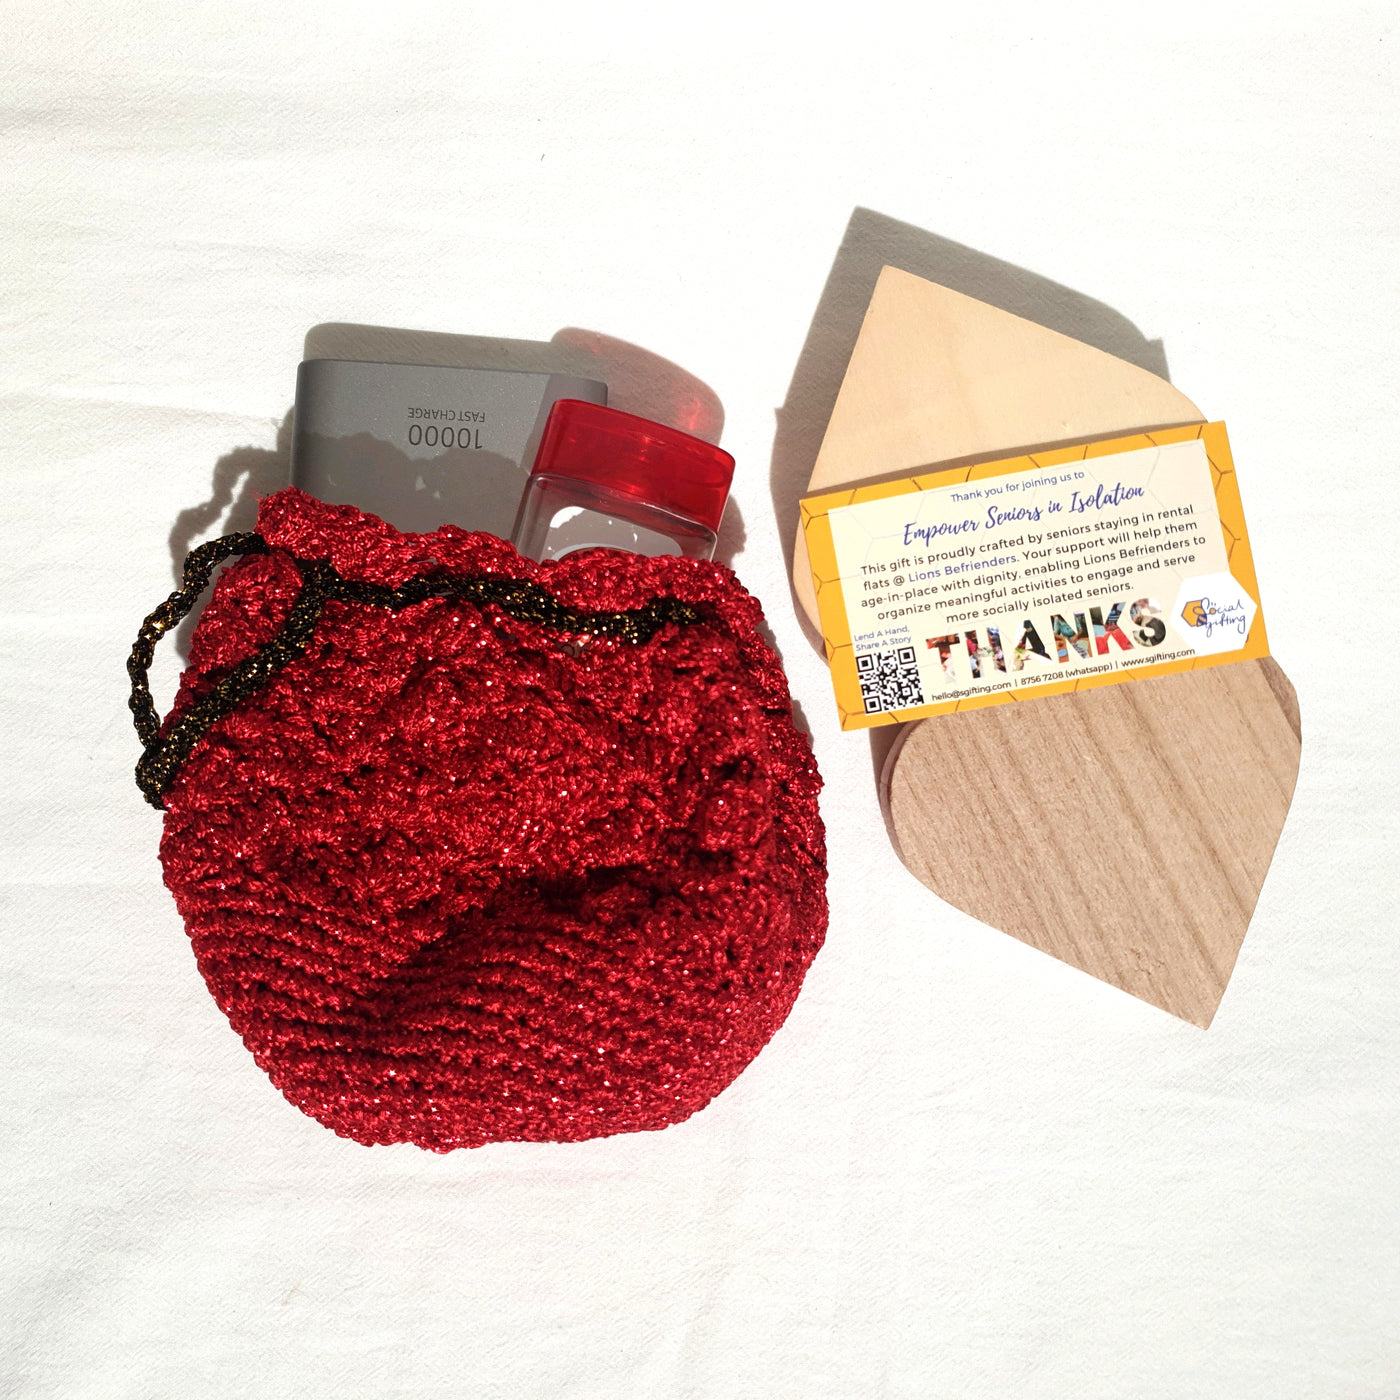 Hand Crocheted Drawstring Pouch (Red)